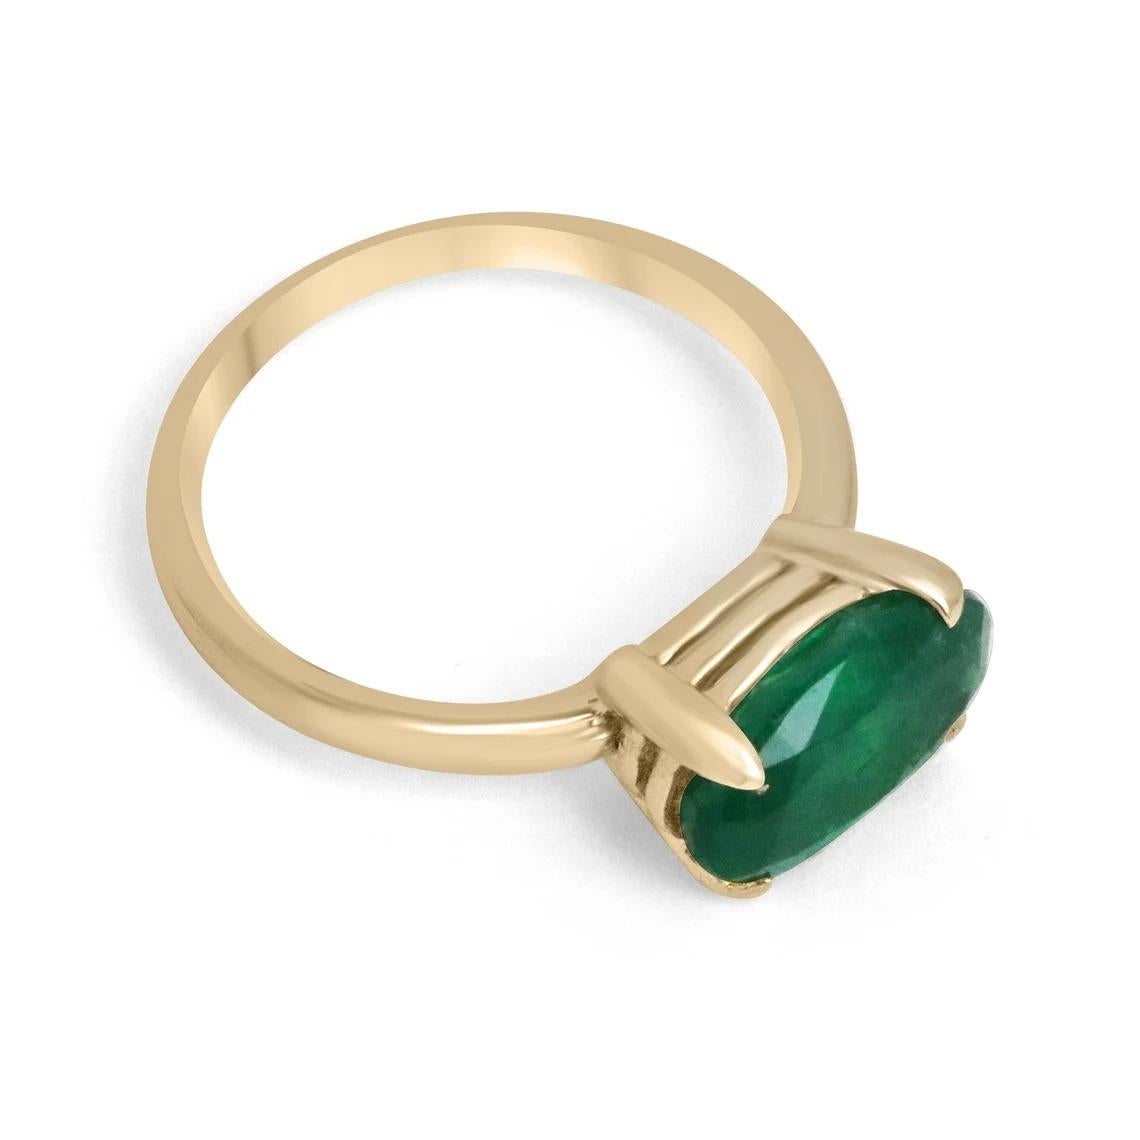 Displayed is a dark forest green emerald, solitaire, oval cut ring in 18K yellow gold. This gorgeous solitaire ring carries a full 2.71-carat emerald in a sleek four-prong setting. The emerald has very good clarity and remarkable luster. This